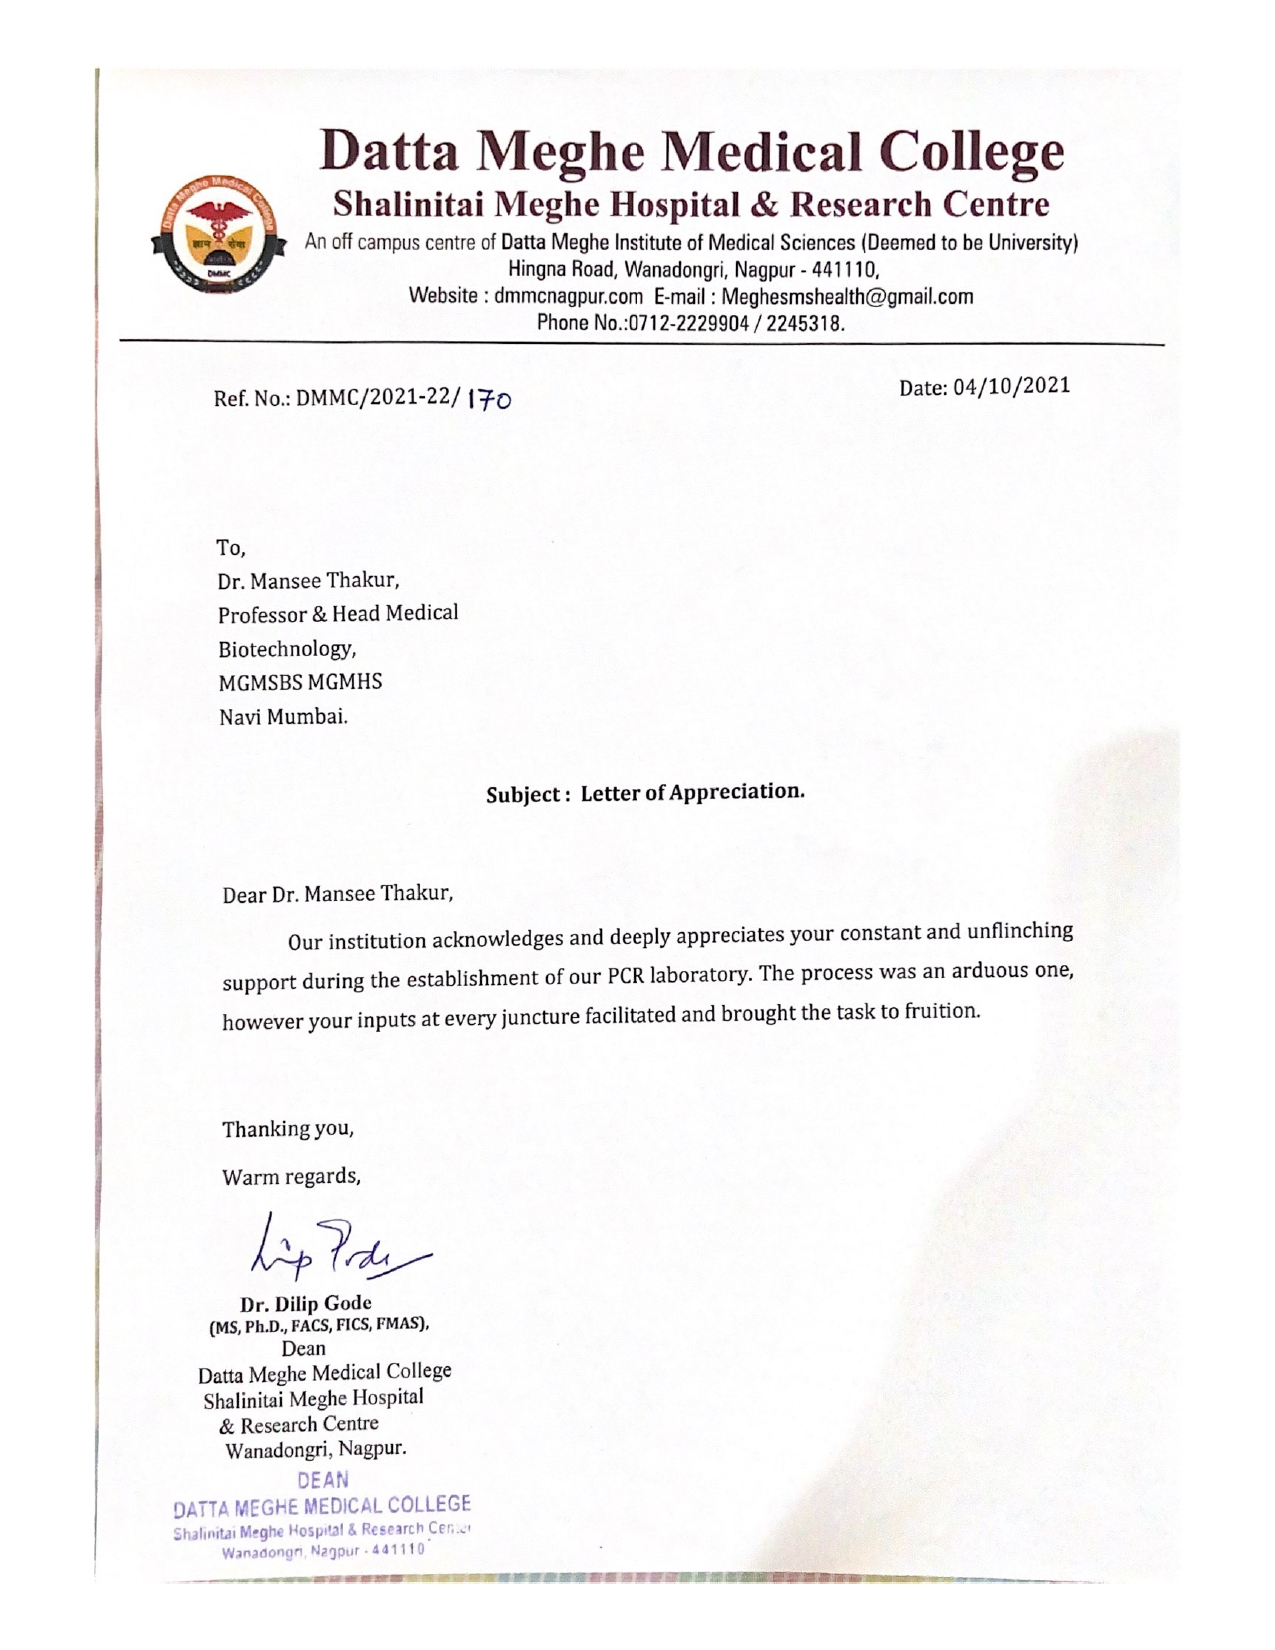 Letter of Appreciation : Dr. Mansee Thakur